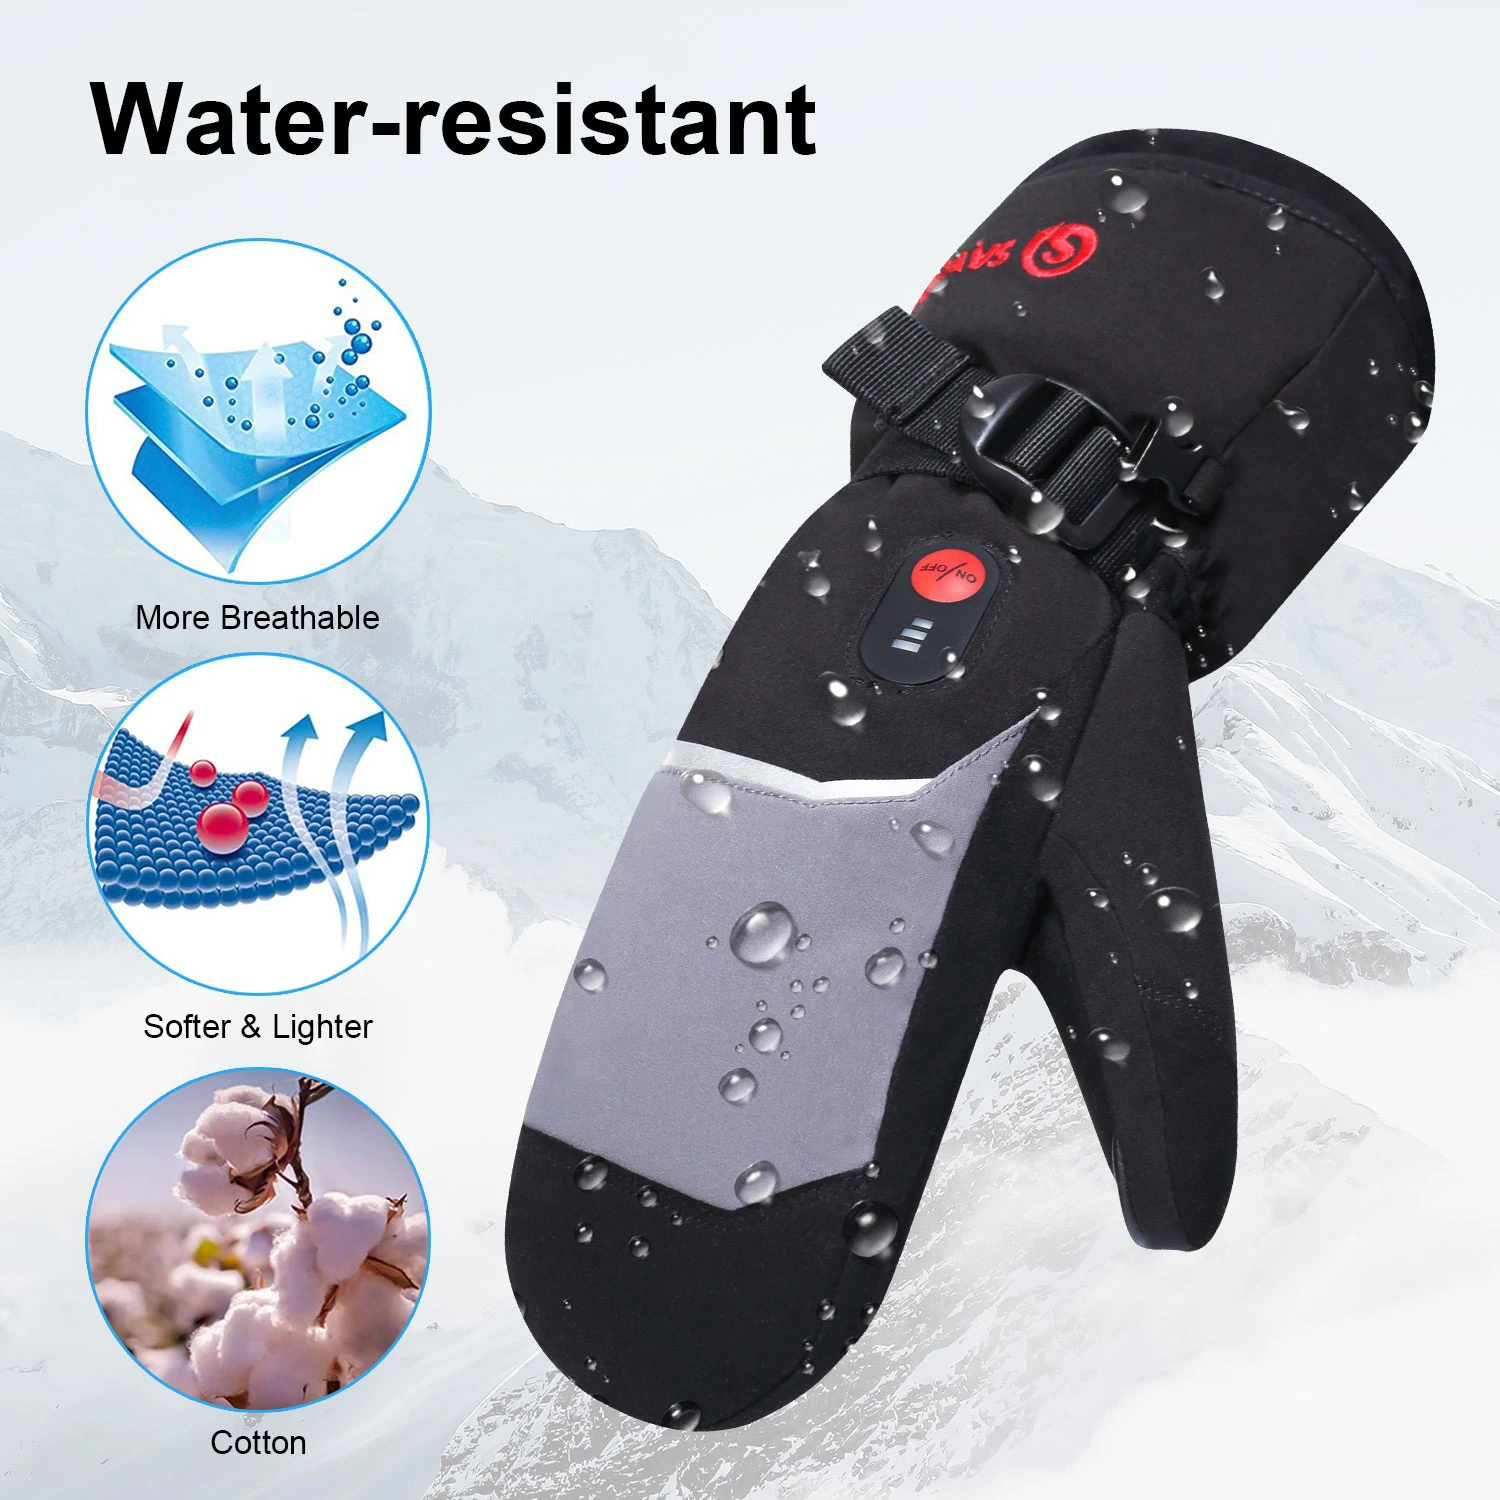 Winter Warm 3 Levels Temperature Control Electrical Battery Heated Gloves Mittens